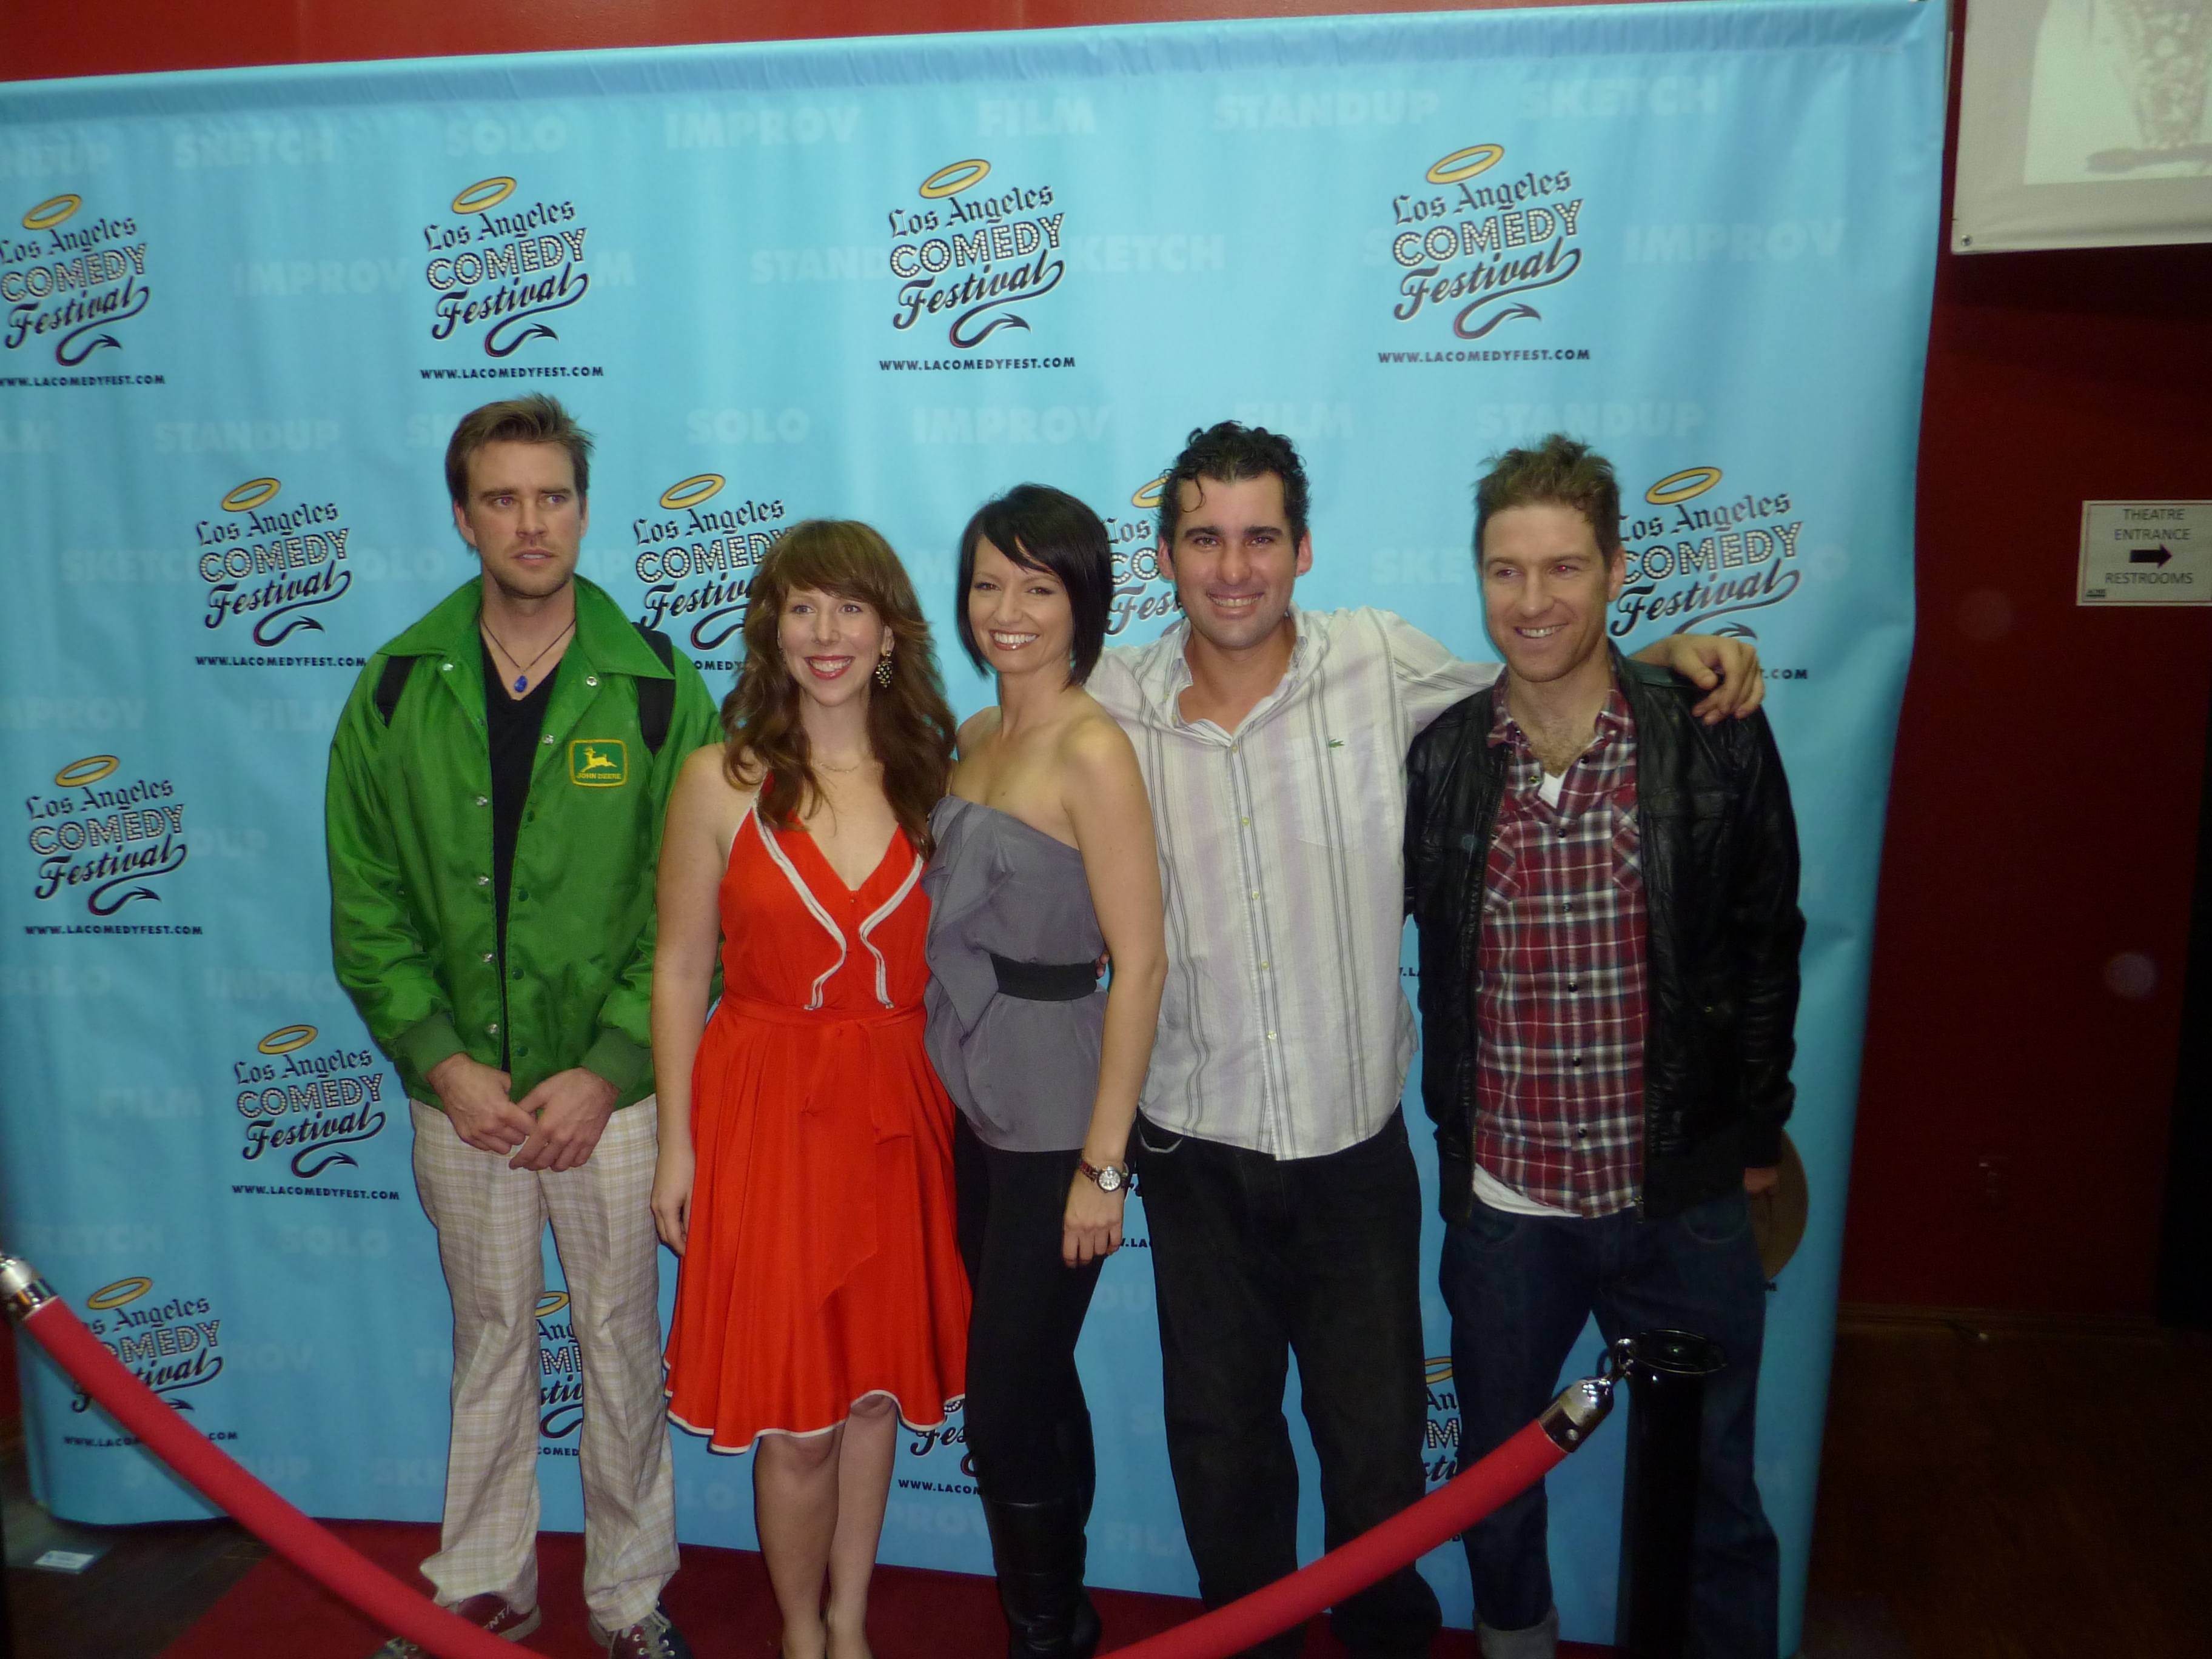 THE iNTECOLLECTUALS SKETCH COMEDY~ WINNERS OF LA COMEDY FESTIVAL BEST LIVE PERFORMANCE 2011